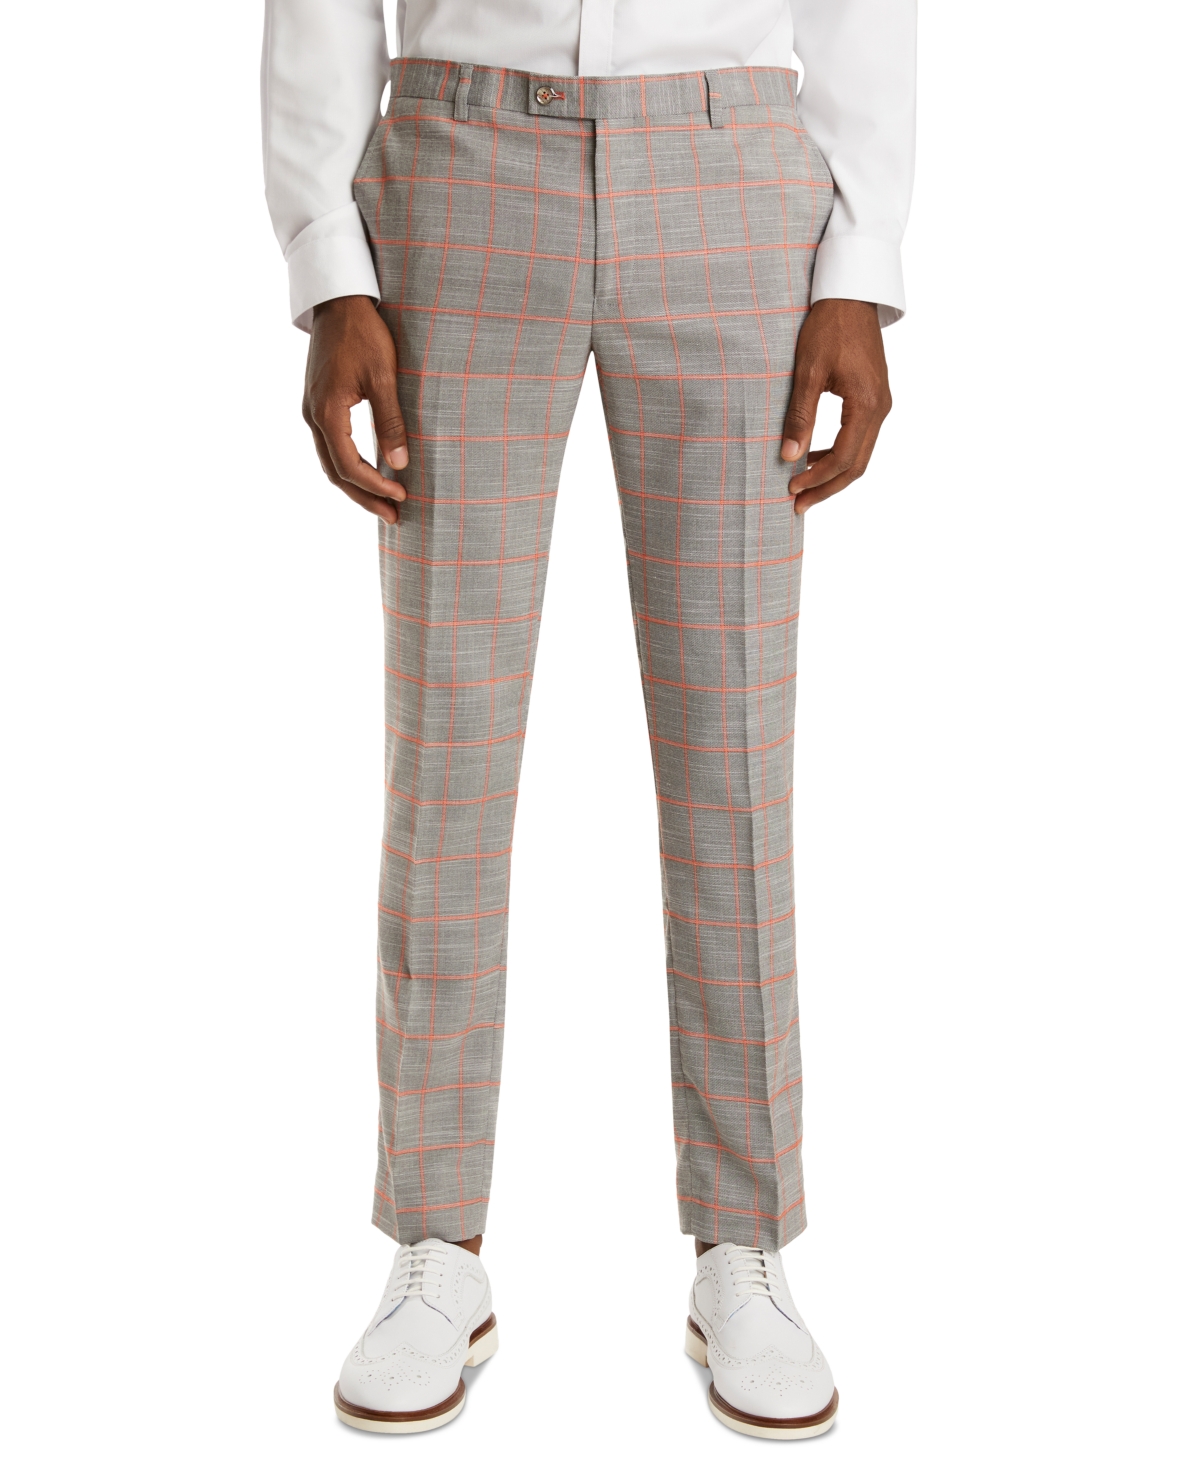 Paisley & Gray Men's Slim-fit Plaid Suit Pants In Peach With Gray Windowpane